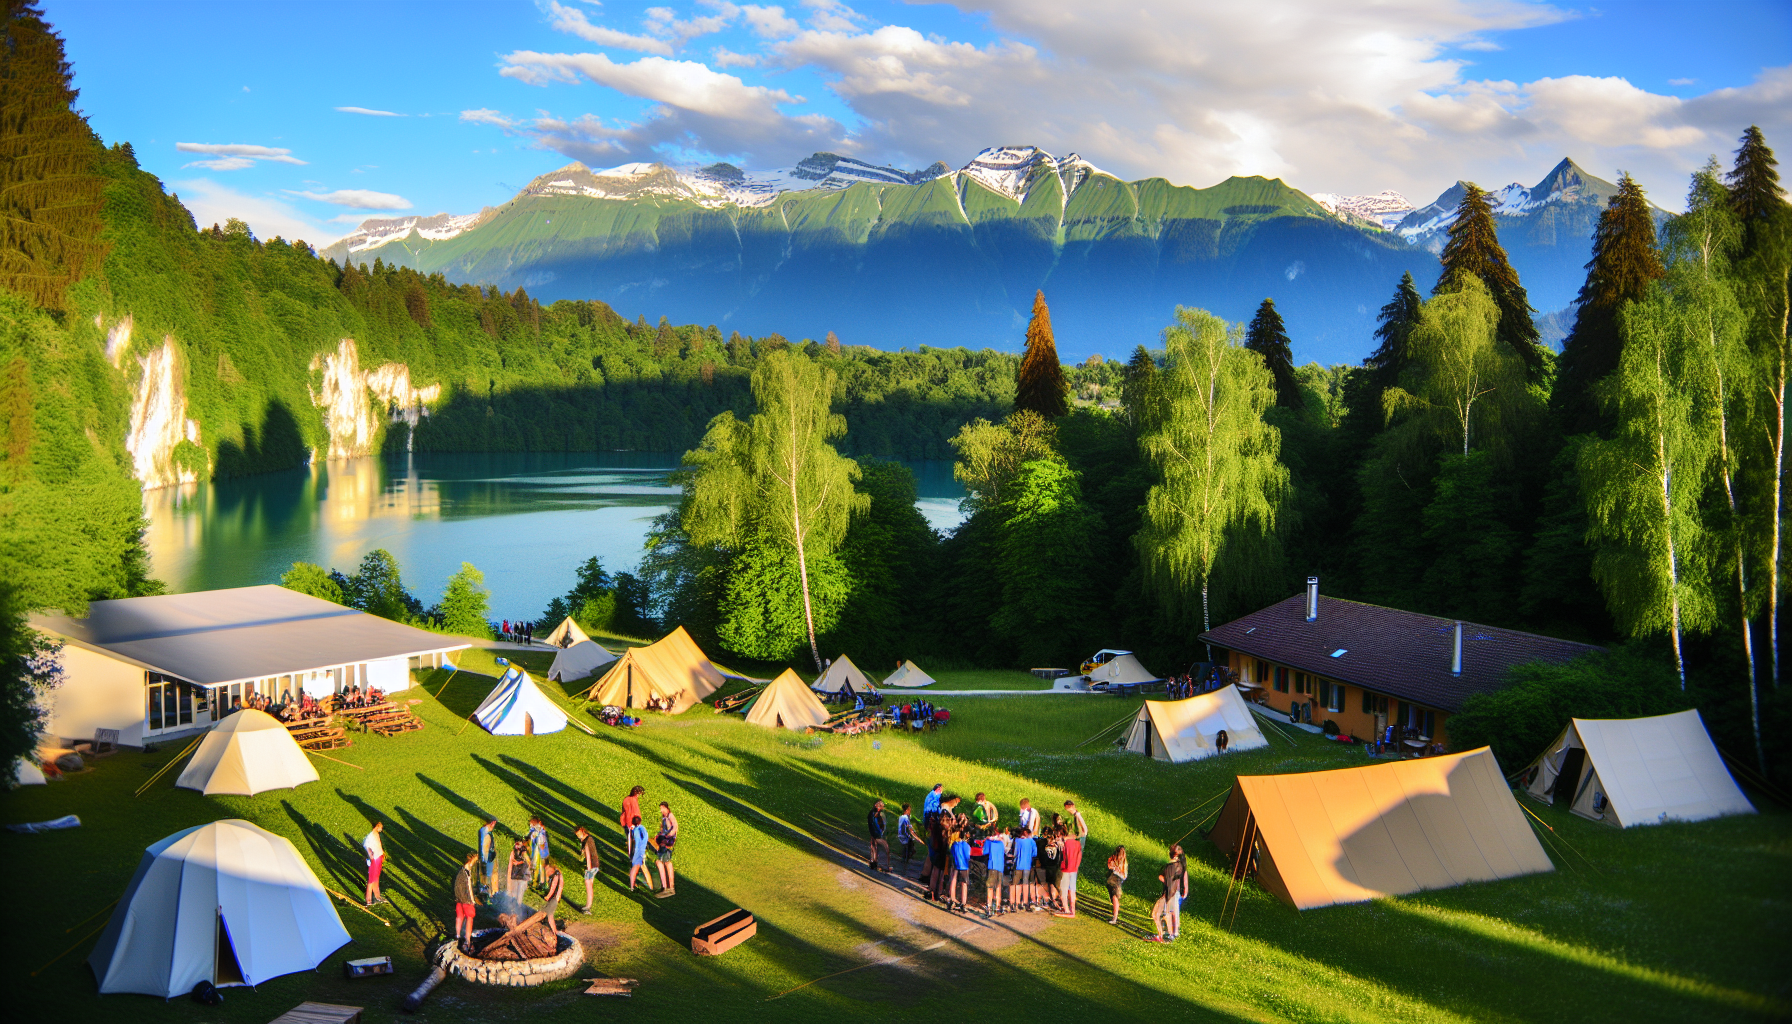 Stunning location of European summer camps